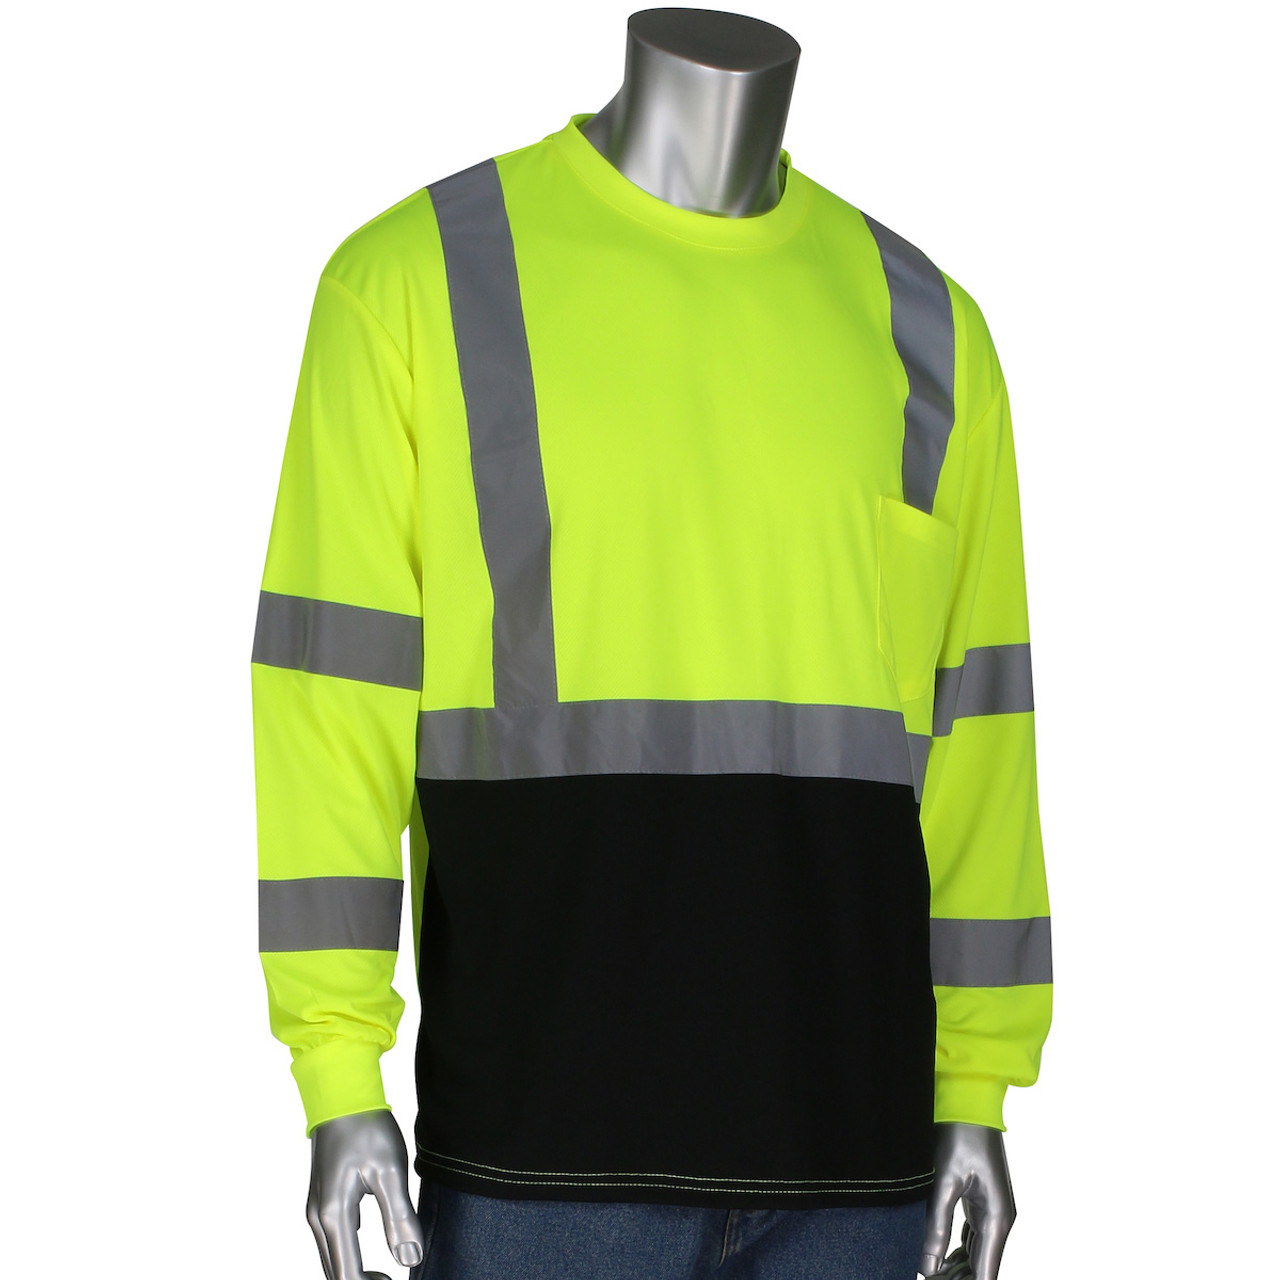 PIP 313-1390B ANSI Type R Class 3 Long Sleeve T-Shirt with 50+ UPF Sun Protection and Black Bottom Front - M, Hi-Vis Orange